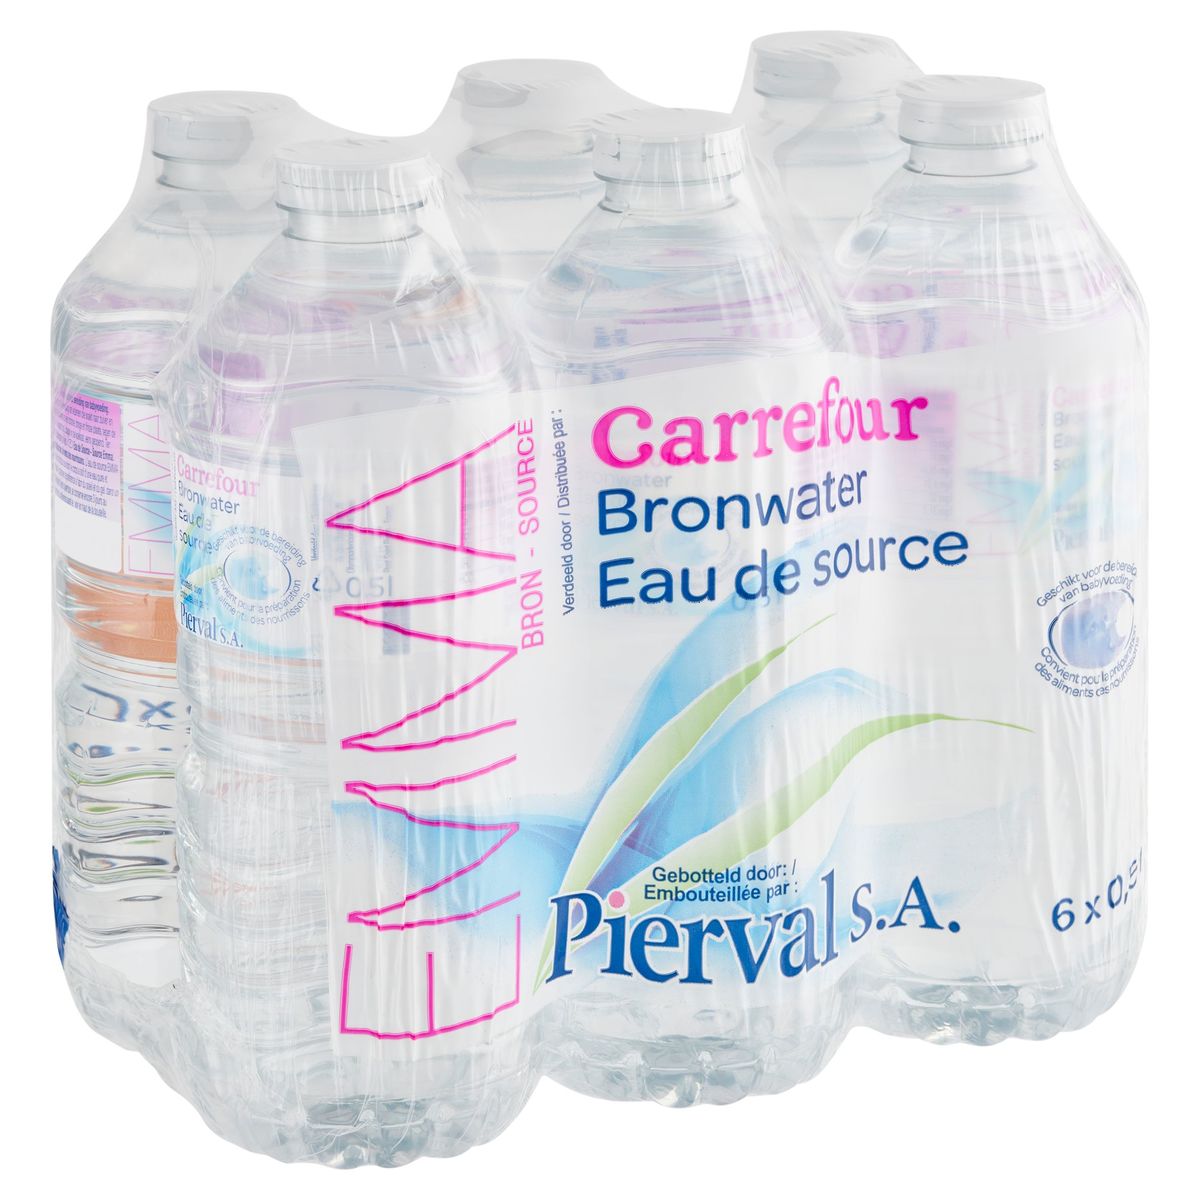 Carrefour Bronwater 6 x 0.5 L